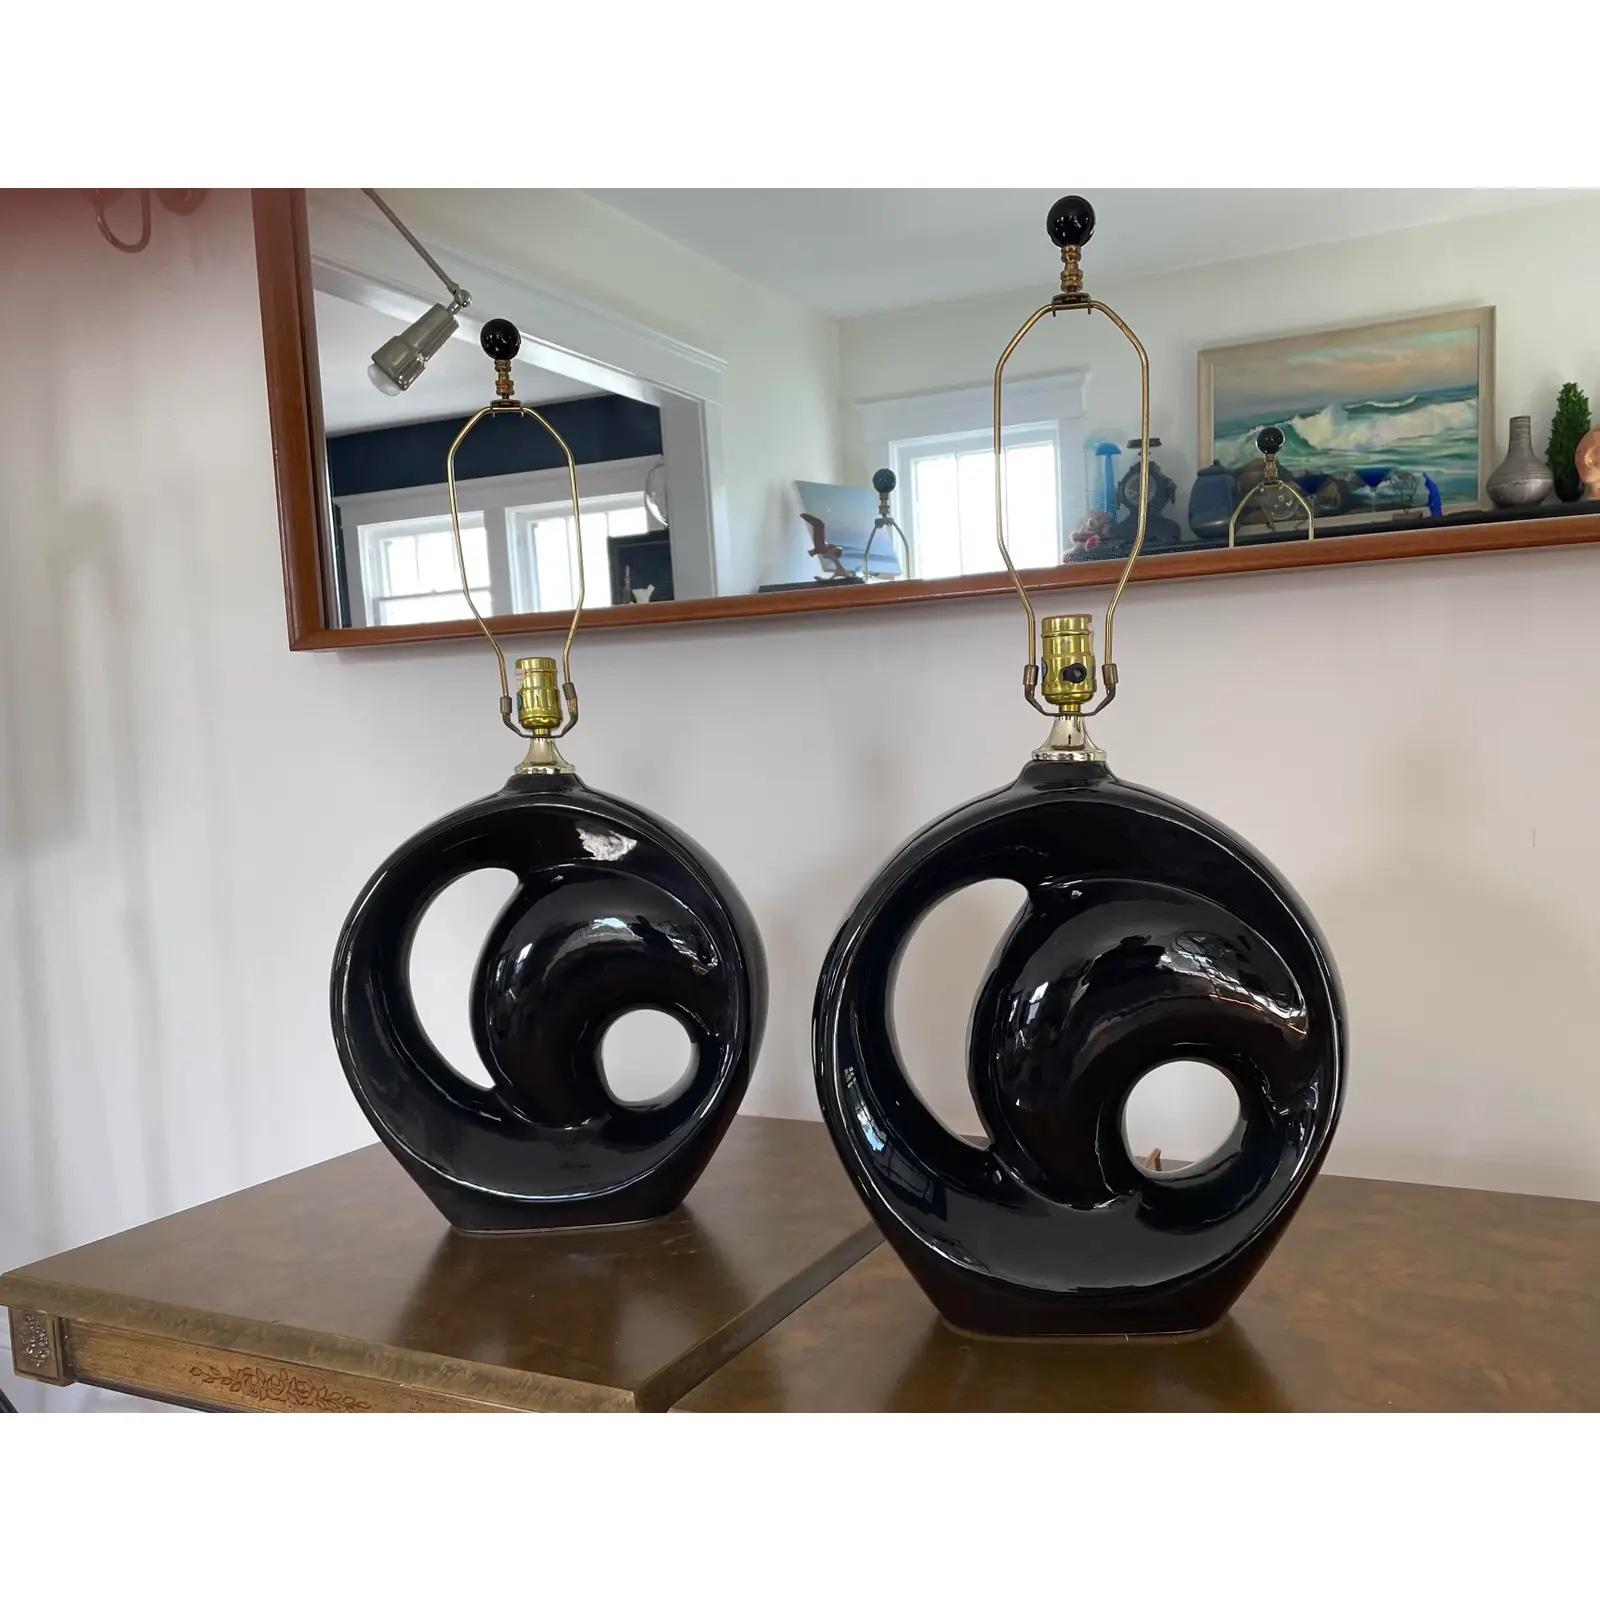 Mid 20th Century Postmodern Ceramic Swirl Lamps, a Pair In Good Condition For Sale In W Allenhurst, NJ